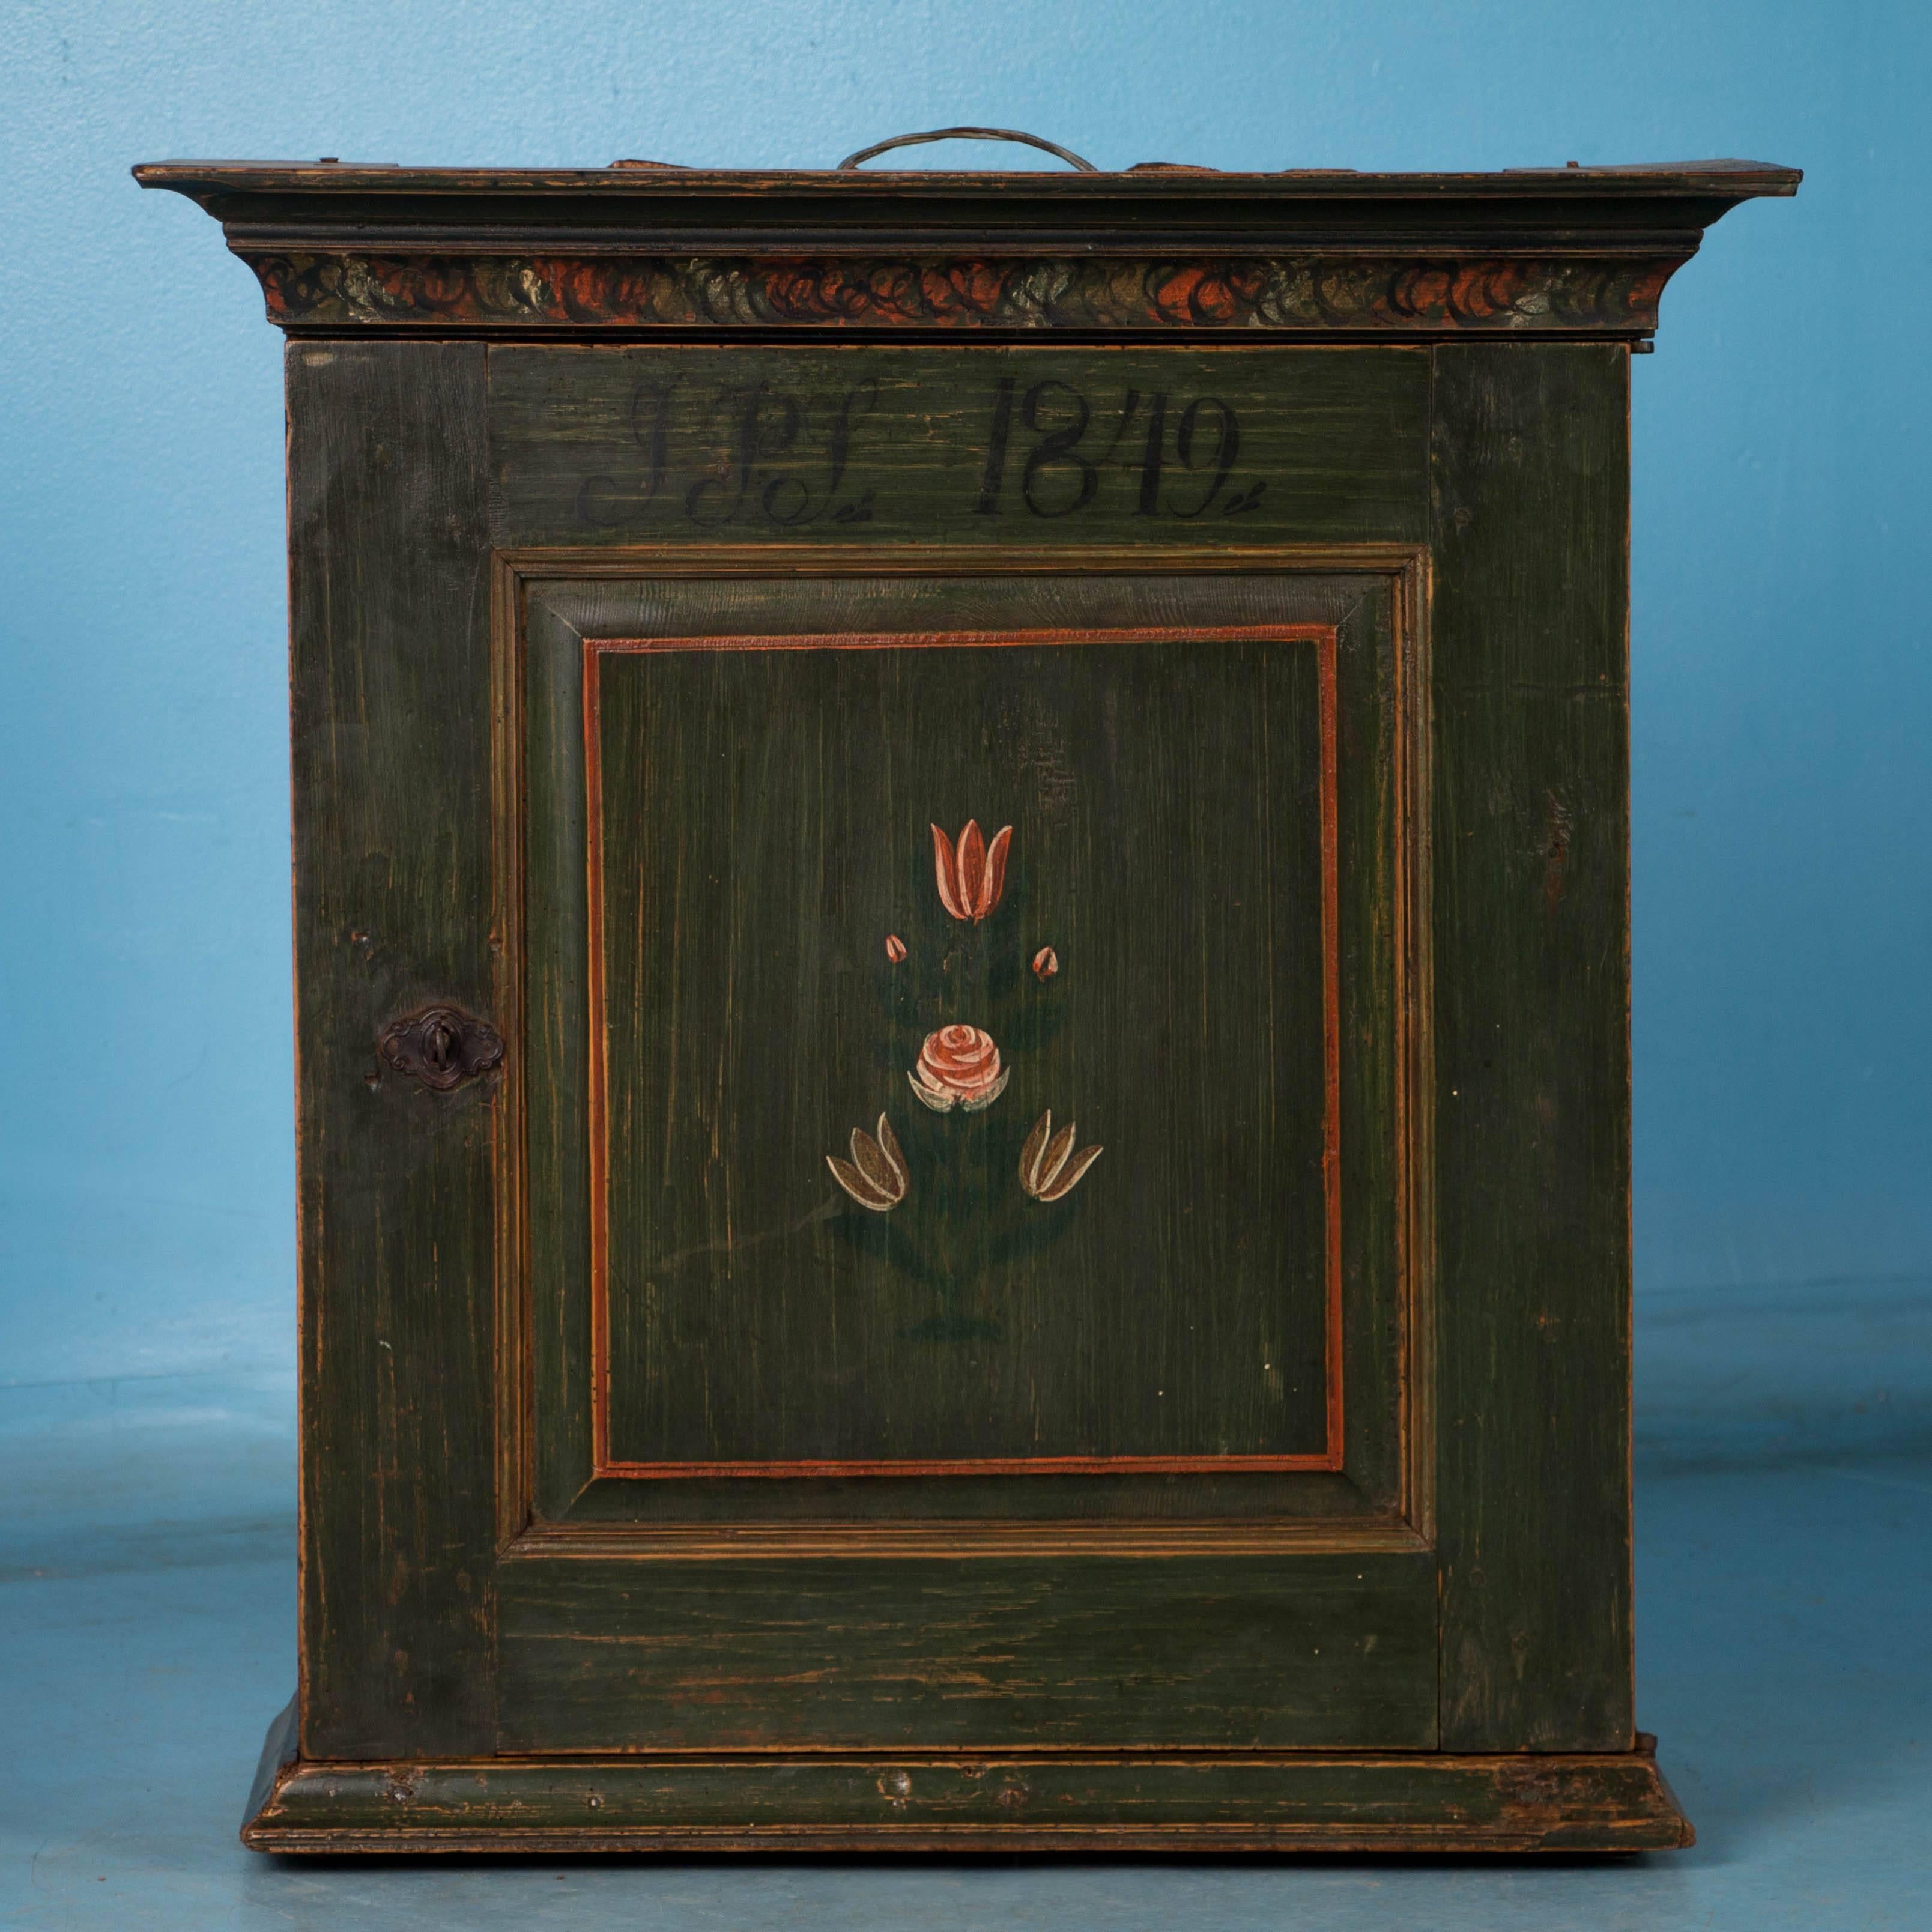 The surprise is inside this unique Swedish Folk Art painted wall cabinet dated 1849. The same lightly distressed green paint on the outside is found inside as well, with multiple drawers and cubbies for all kinds of storage. Please take a moment to